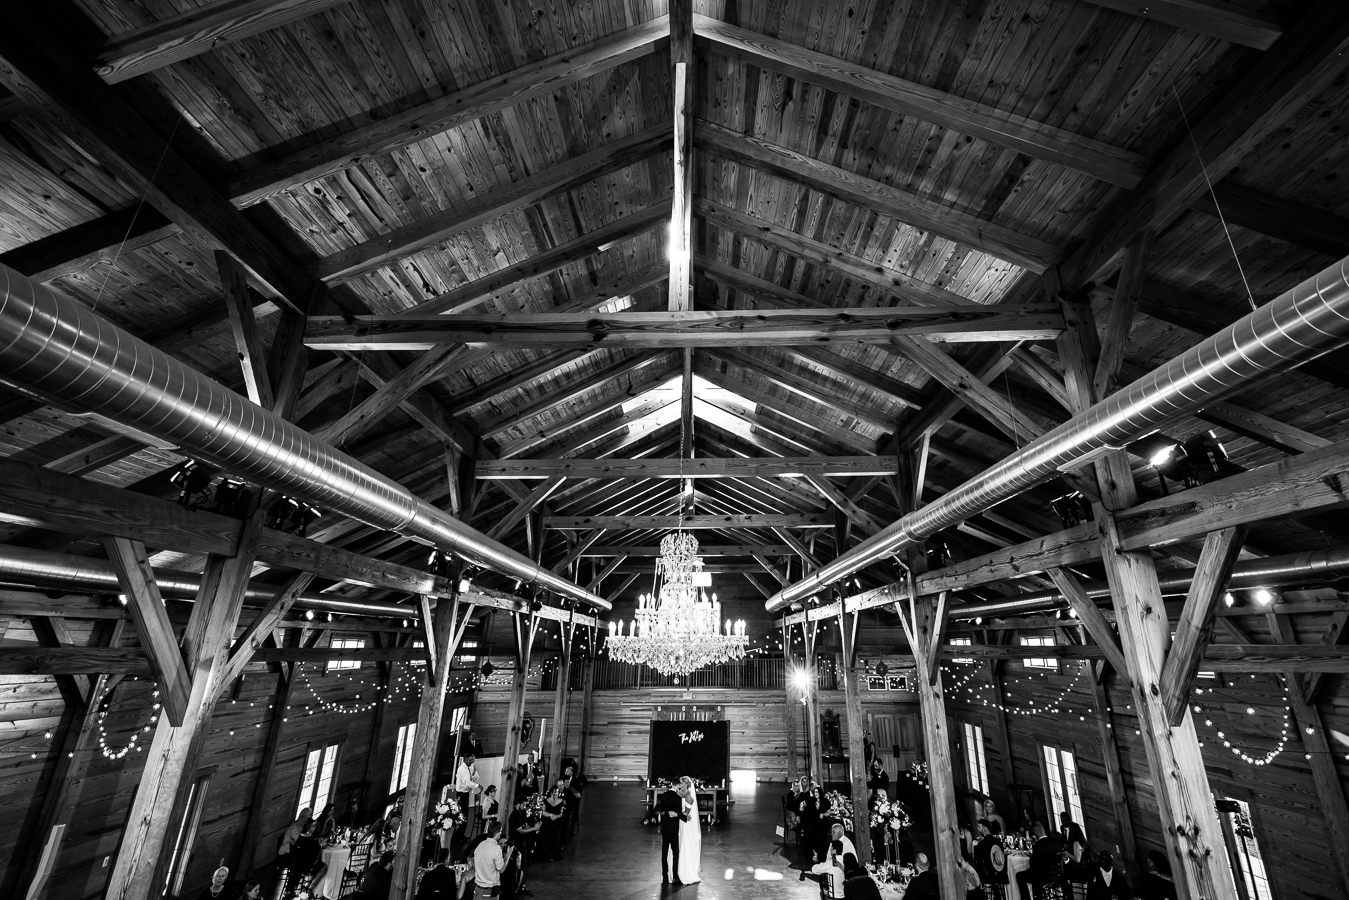 Middleburg Barn Wedding Photographer, lisa rhinehart, captures this unique, creative image of the couple sharing their first dance with the architecture of the building featured in the image 